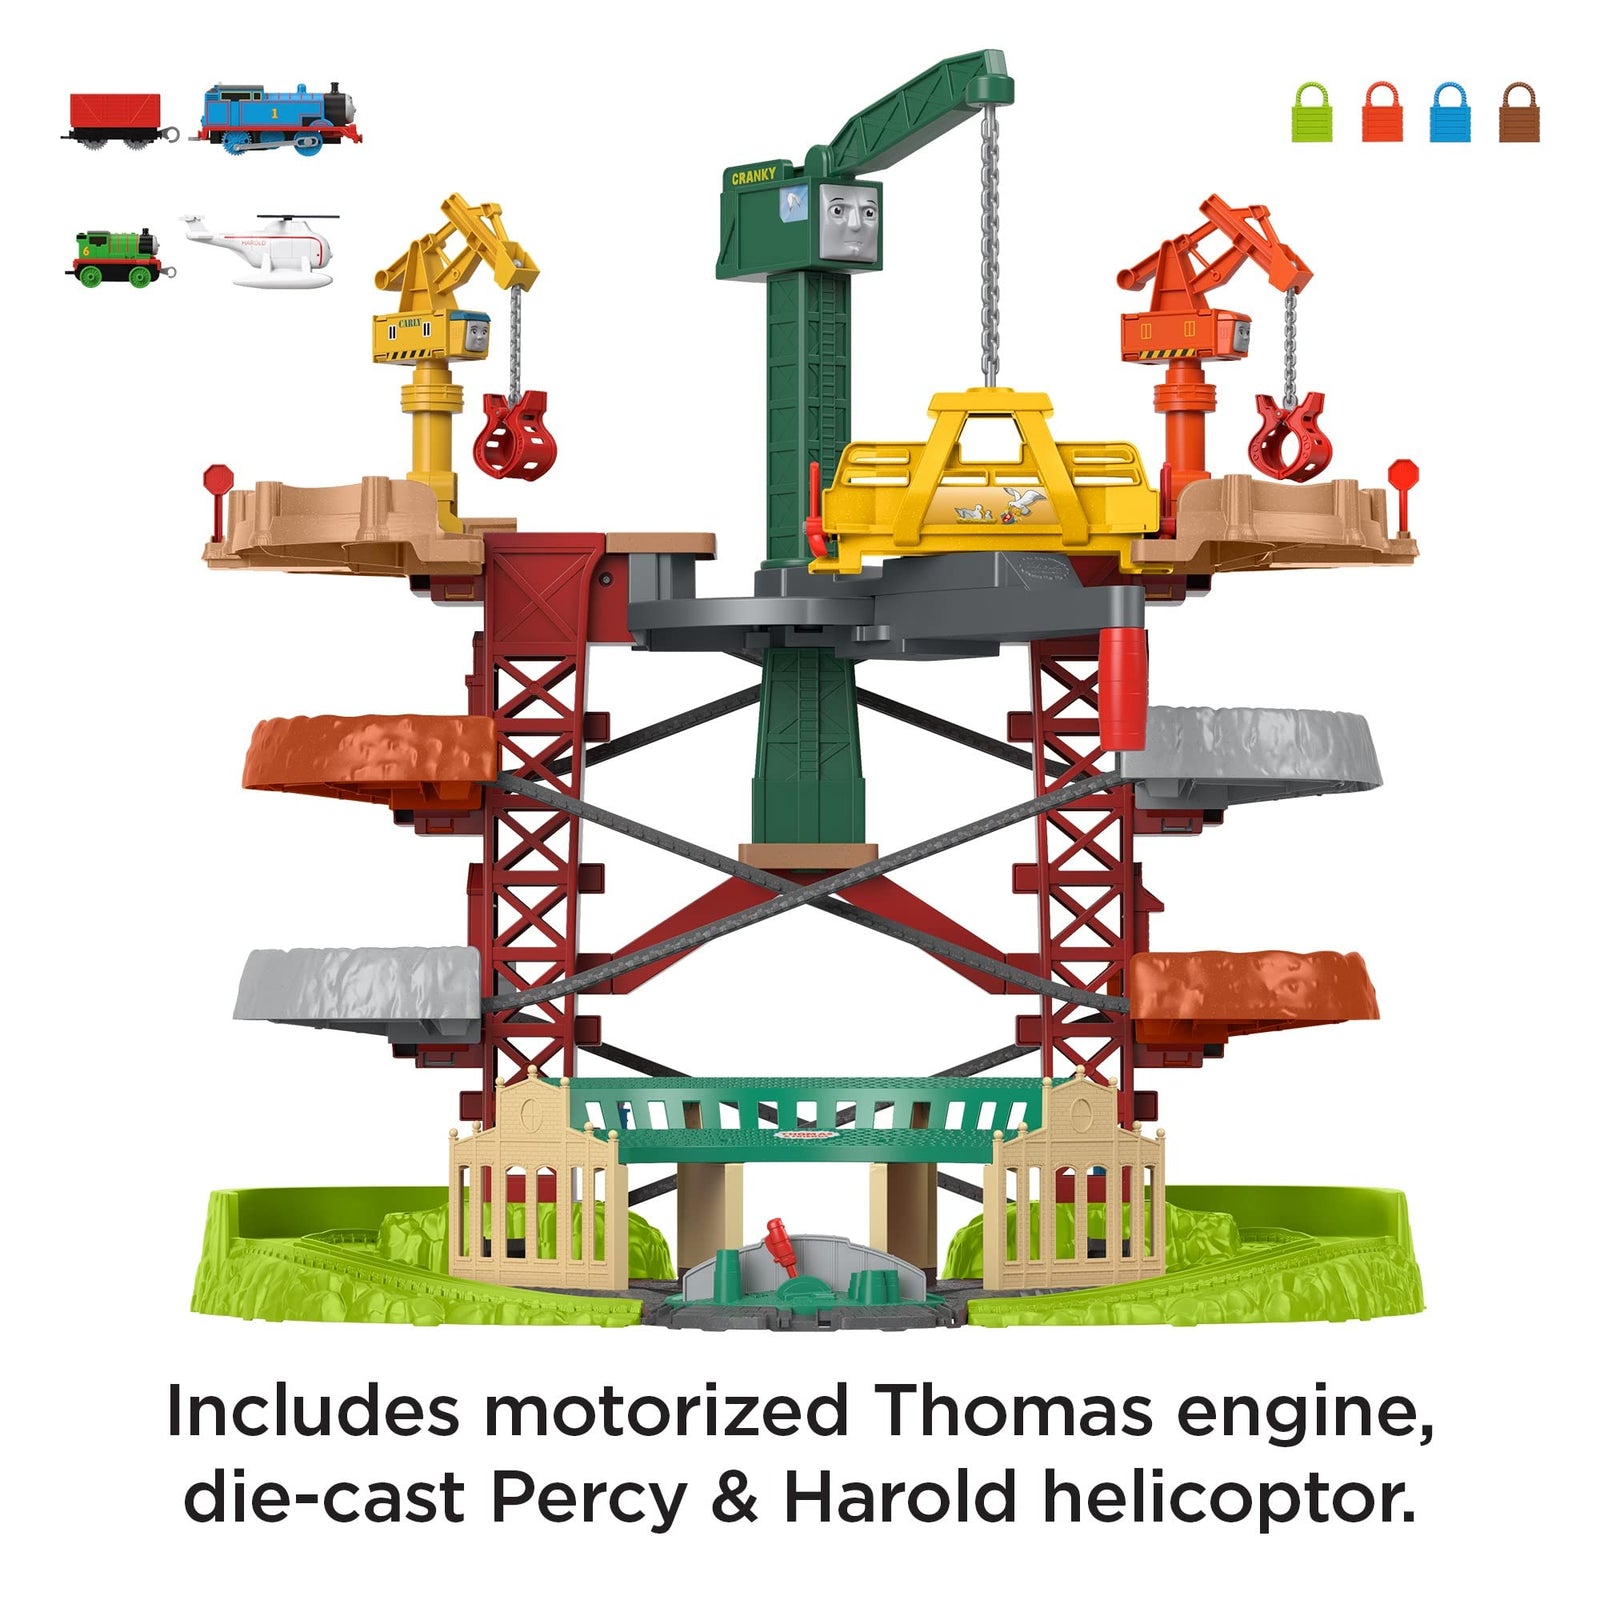 Thomas & Friends Trains & Cranes Super Tower, motorized train and track set for preschool kids ages 3 years and up